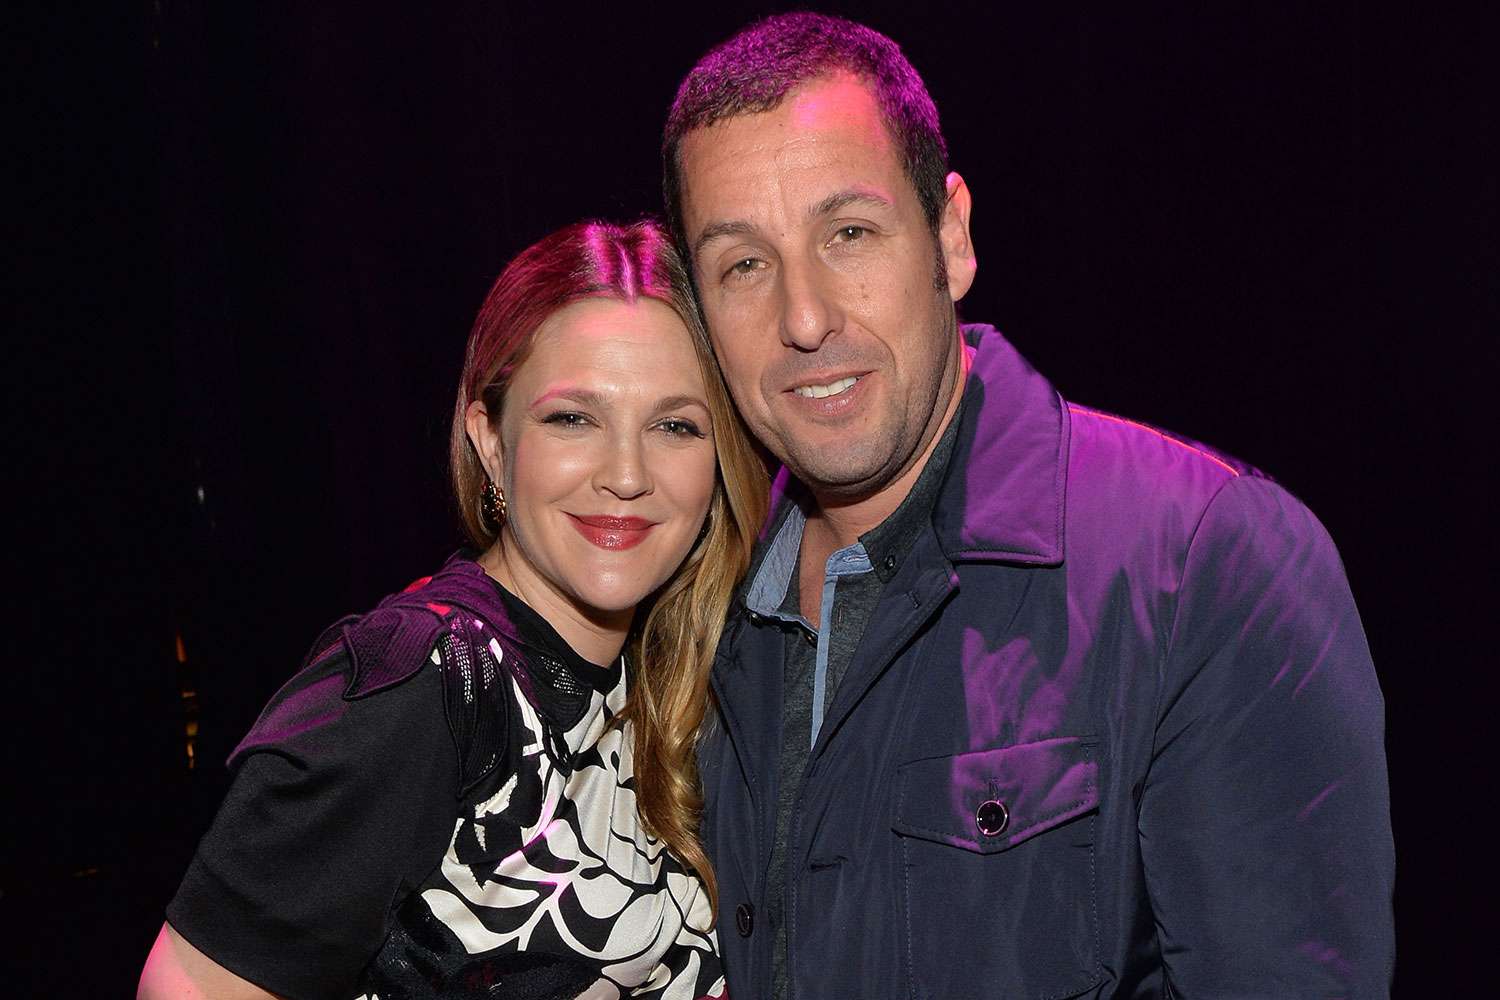 LAS VEGAS, NV - MARCH 27: Female Star of the Year award winner Drew Barrymore (L) and Male Star of the Year award winner Adam Sandler attend The CinemaCon Big Screen Achievement Awards brought to you by The Coca-Cola Company during CinemaCon, the official convention of the National Association of Theatre Owners, at The Colosseum at Caesars Palace on March 27, 2014 in Las Vegas, Nevada. (Photo by Michael Buckner/Getty Images for CinemaCon)